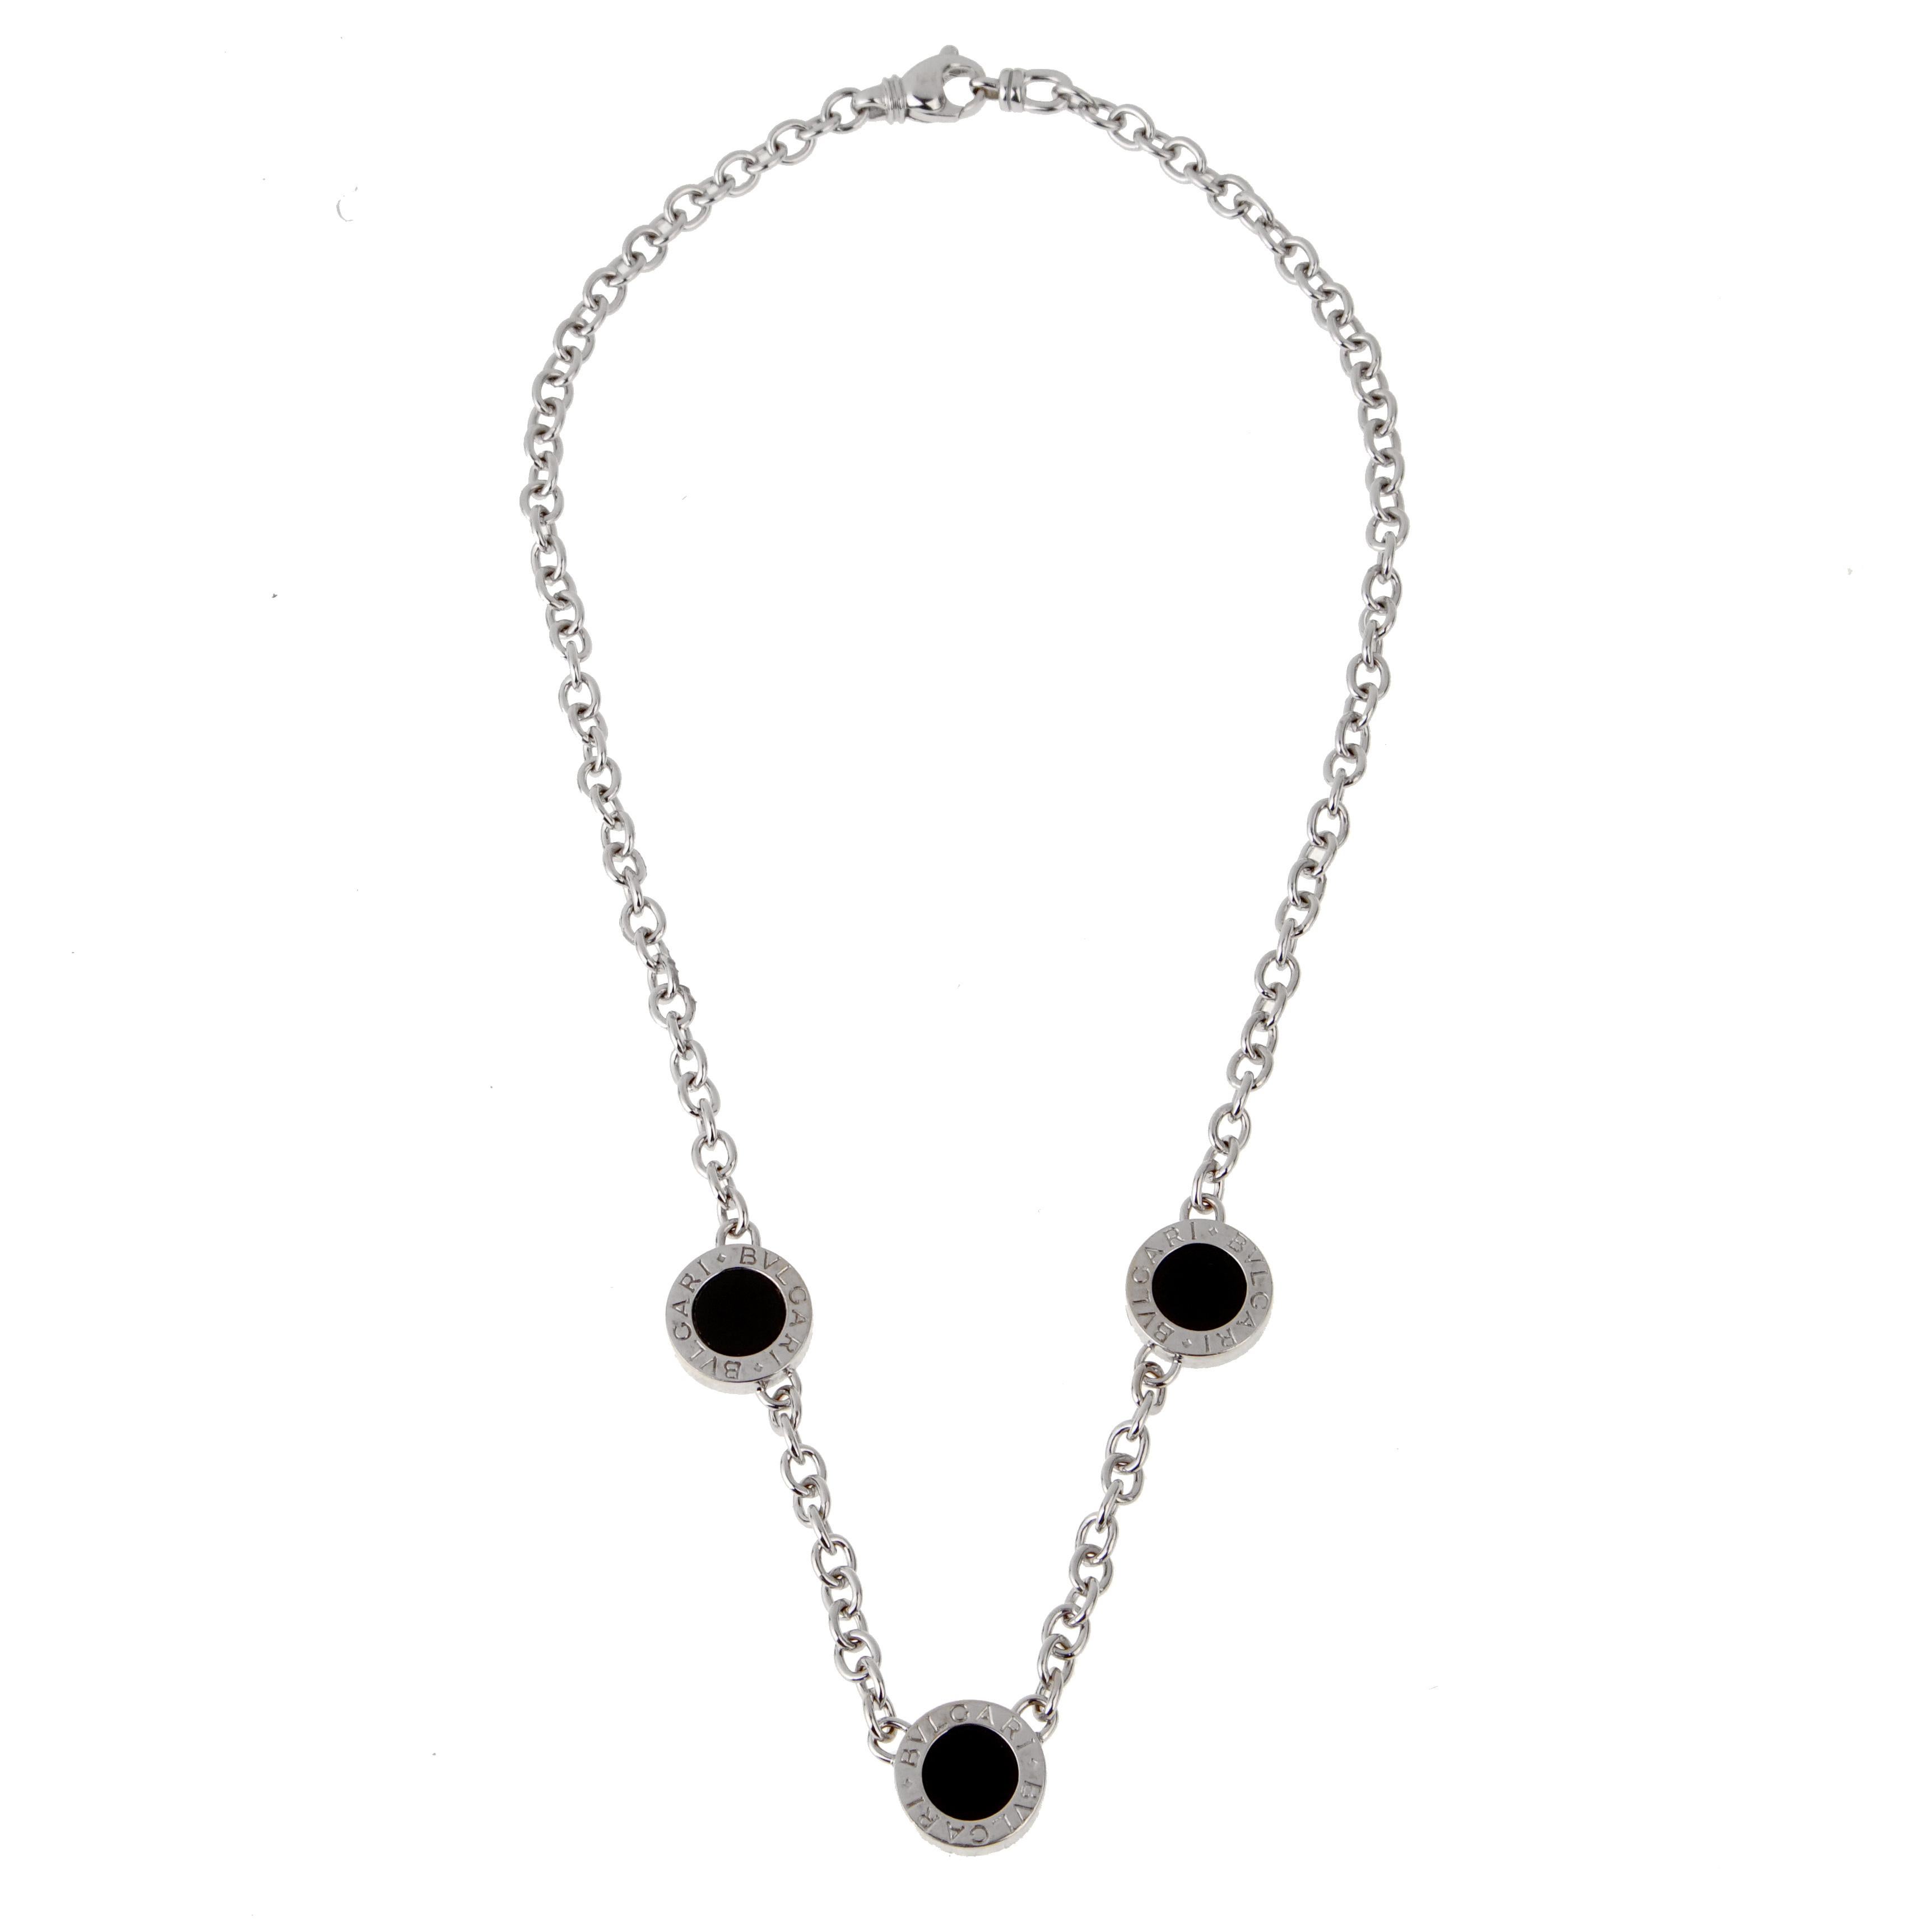 A fabulous Bulgari Bulgari necklace featuring a reversible design, set with round brilliant cuts, the opposing design is set with onyx inserts crafted in 18k white gold.